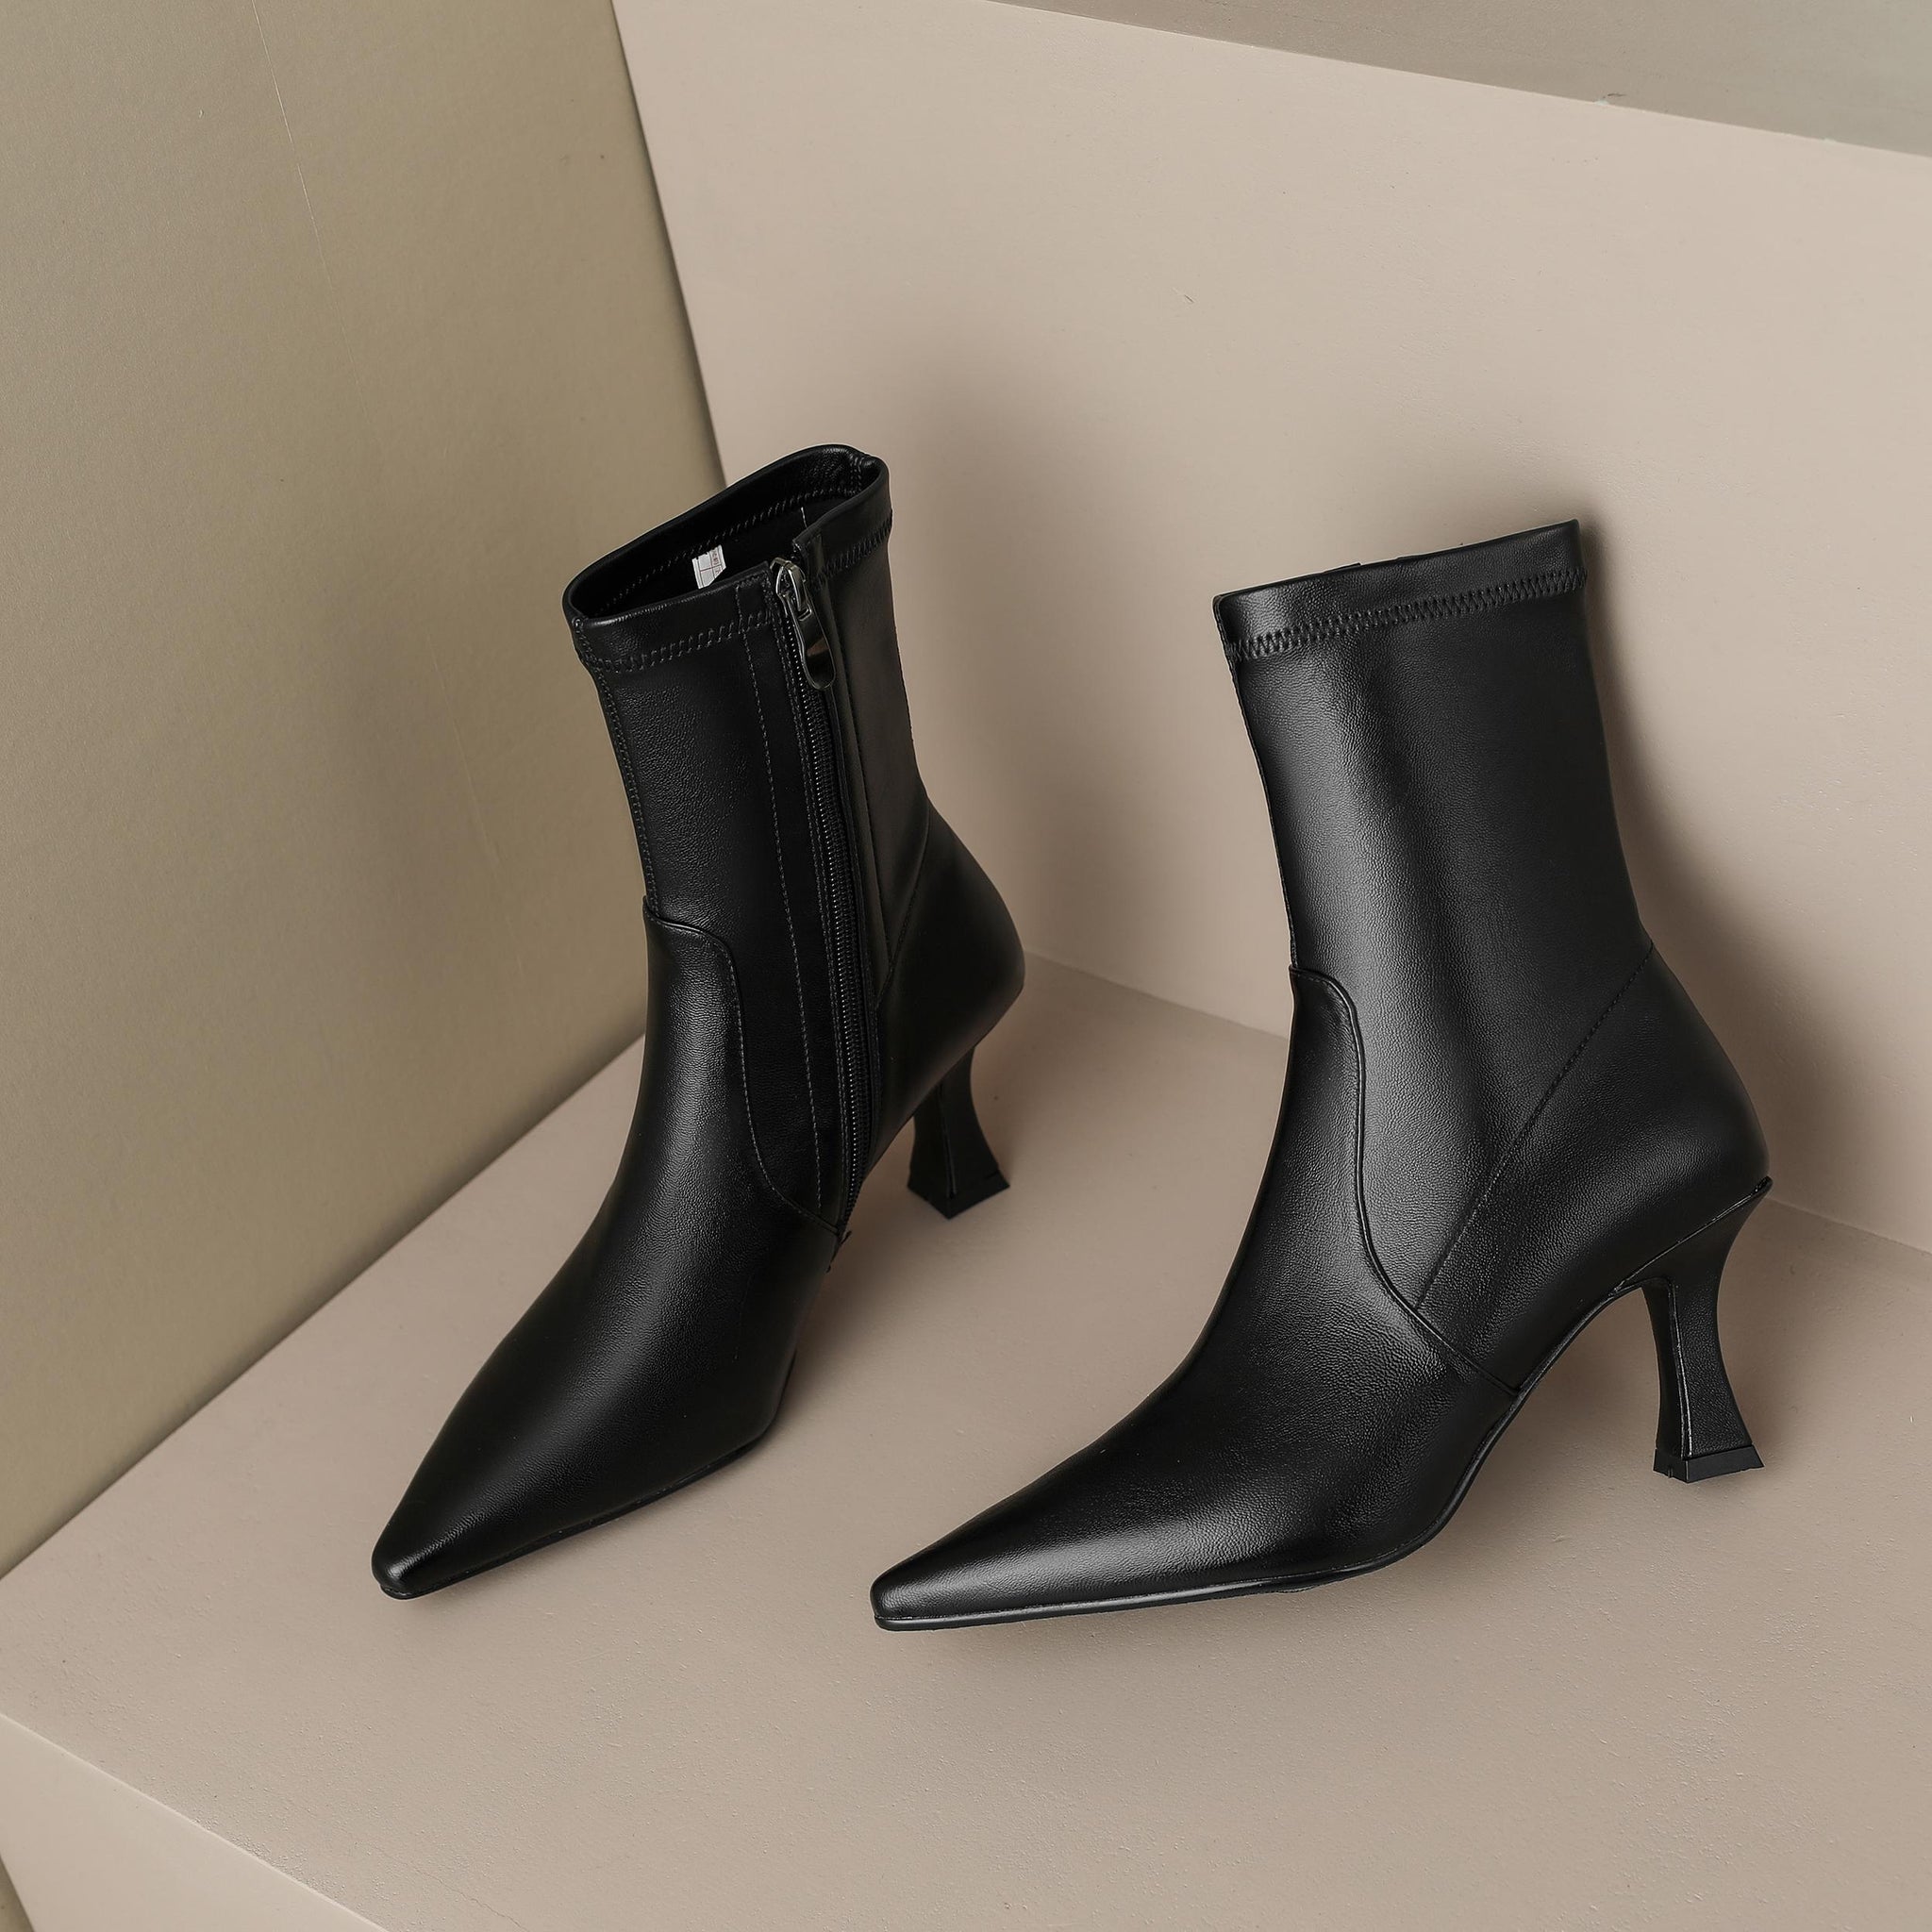 Tight Pointed Toe Ankle Boots